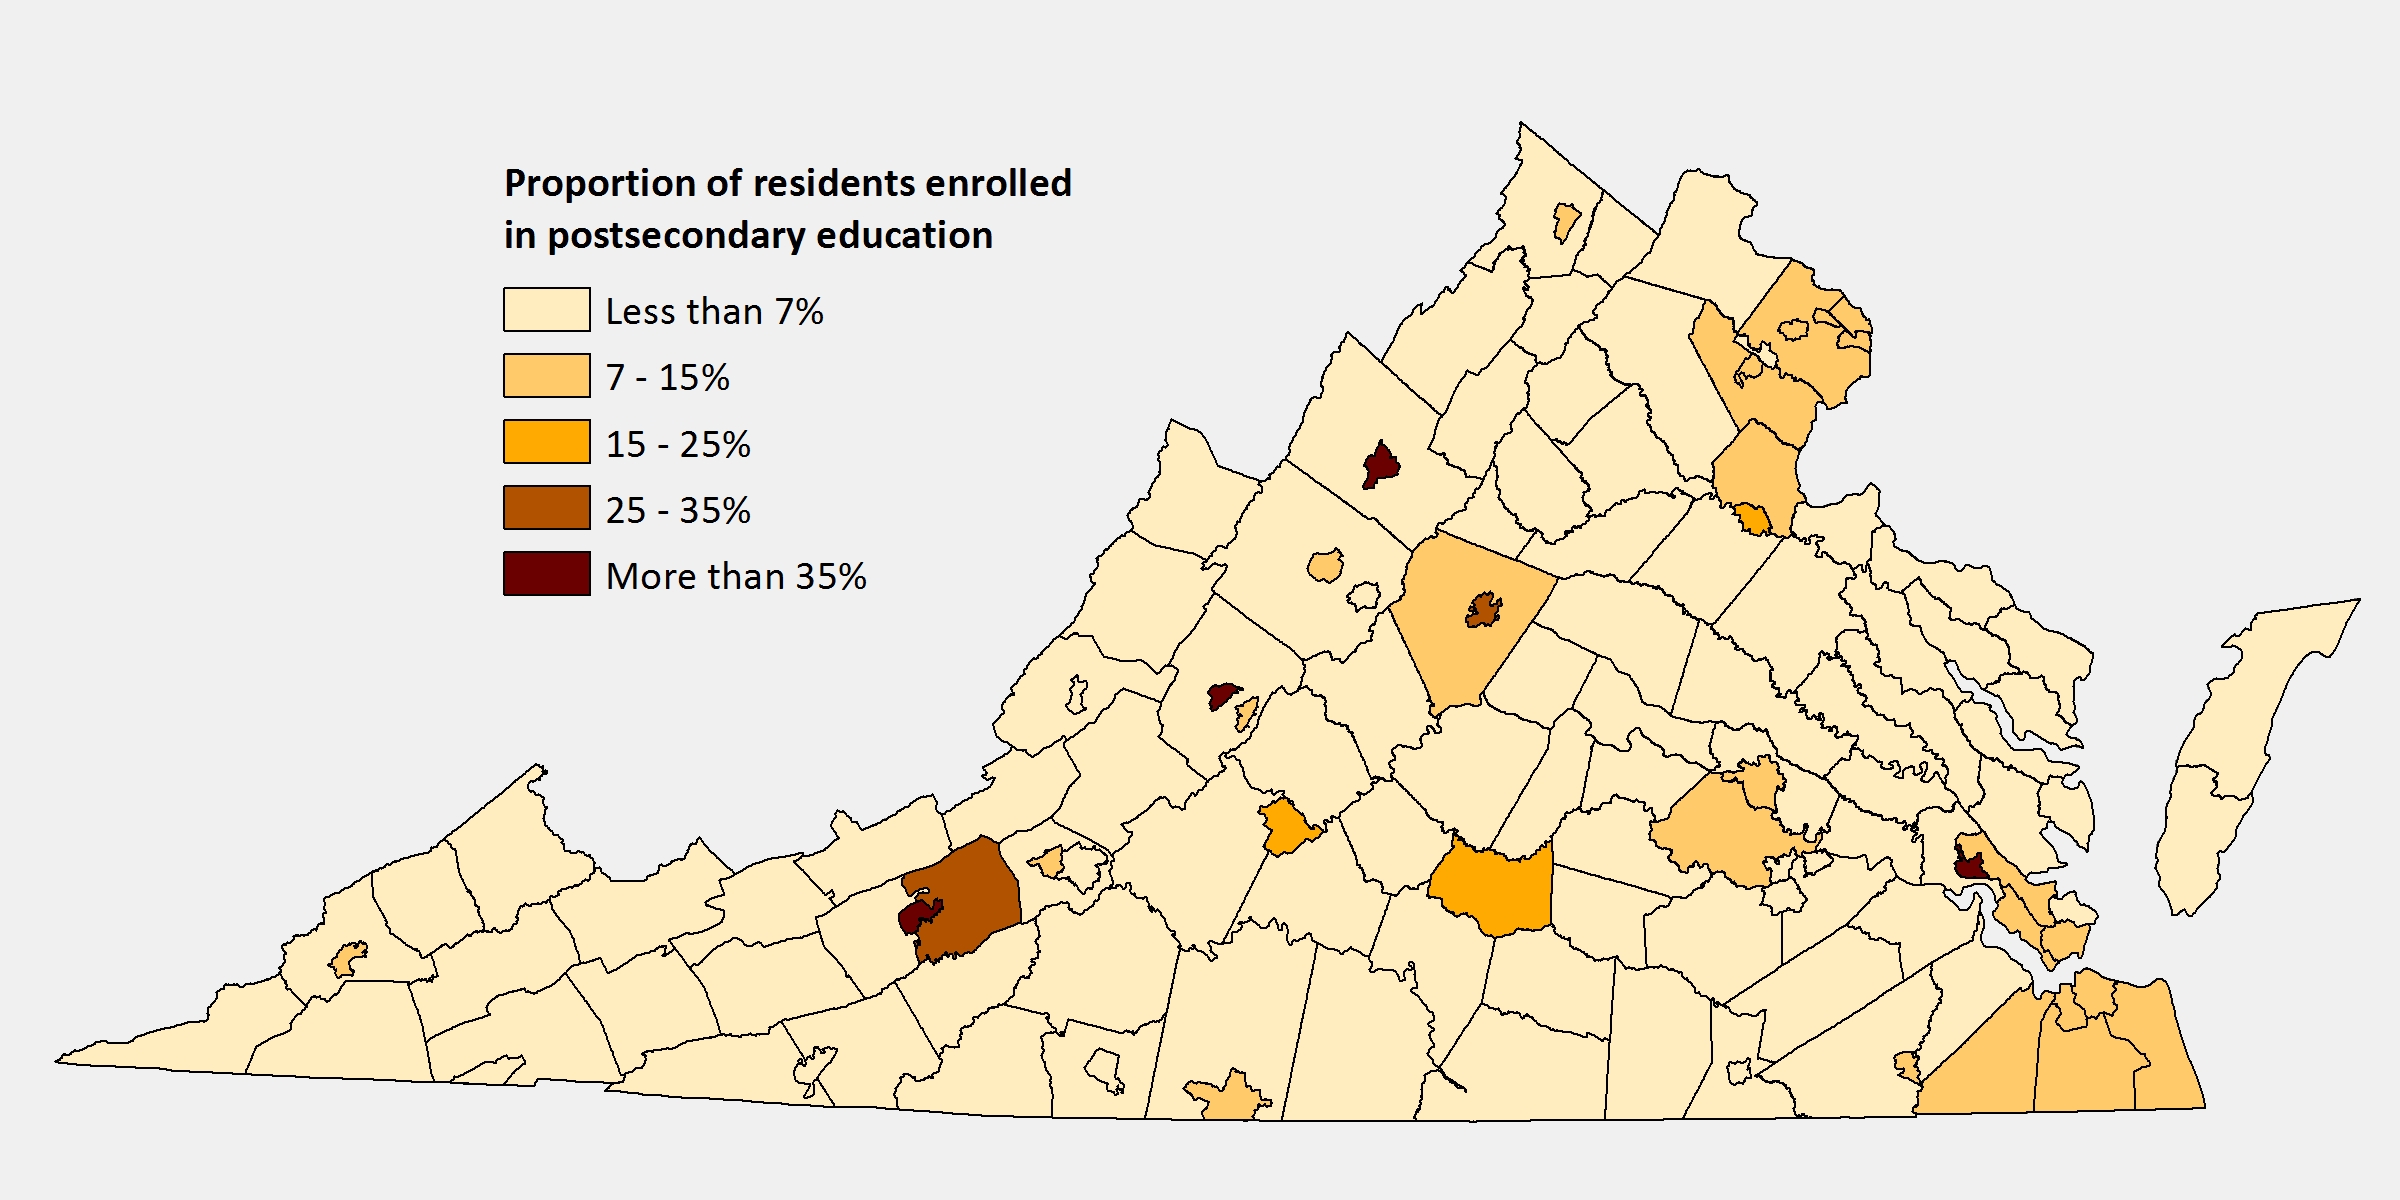 The above map shows the percentage of residents enrolled in postsecondary education by locality.